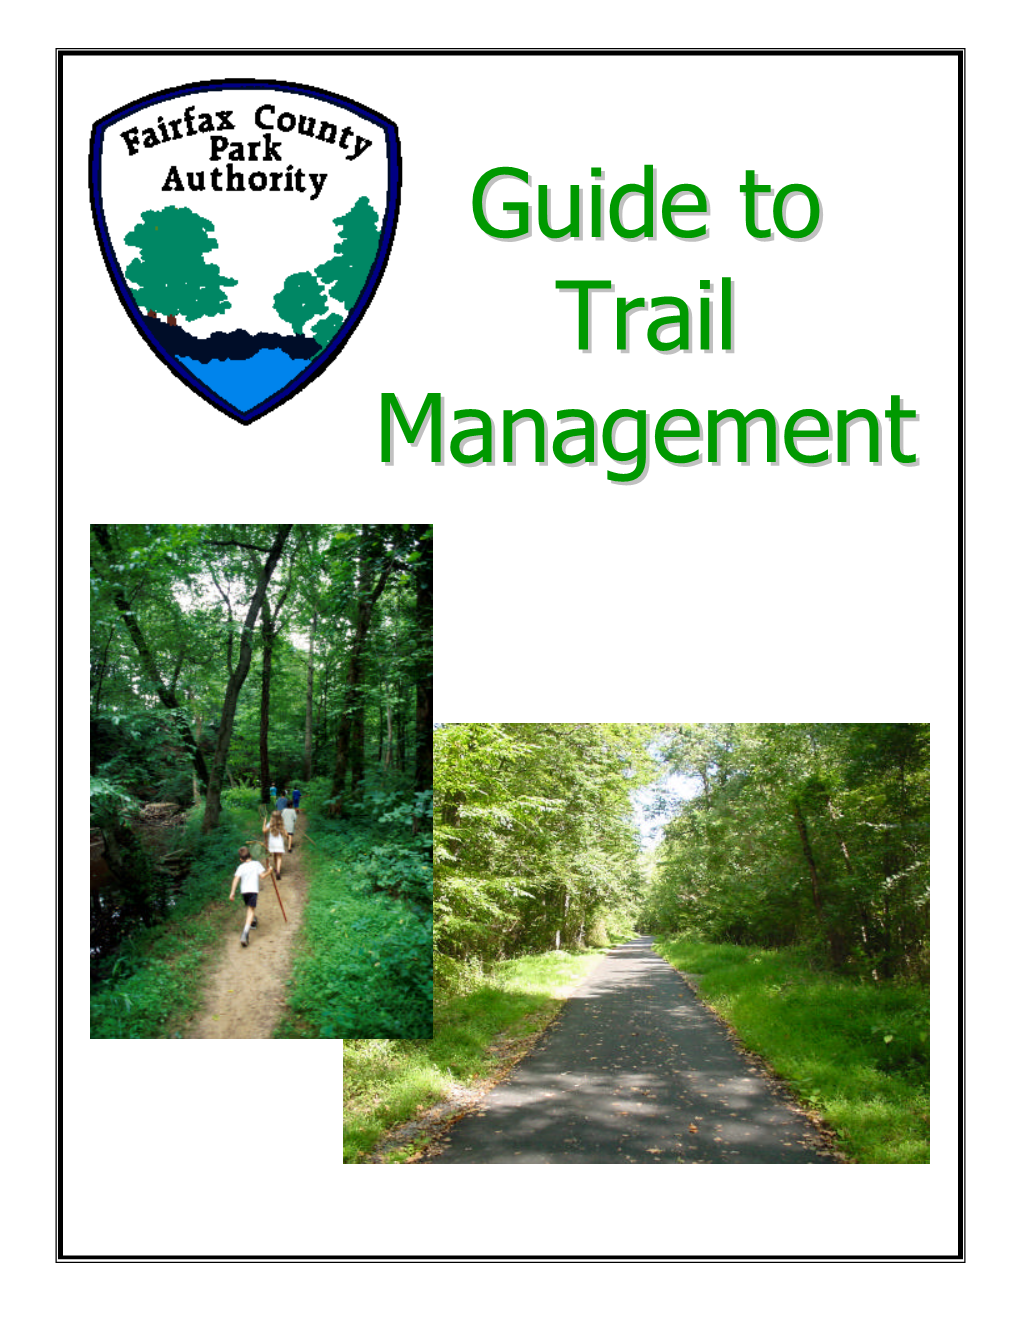 Guide to Trail Management – Page 1 Introduction